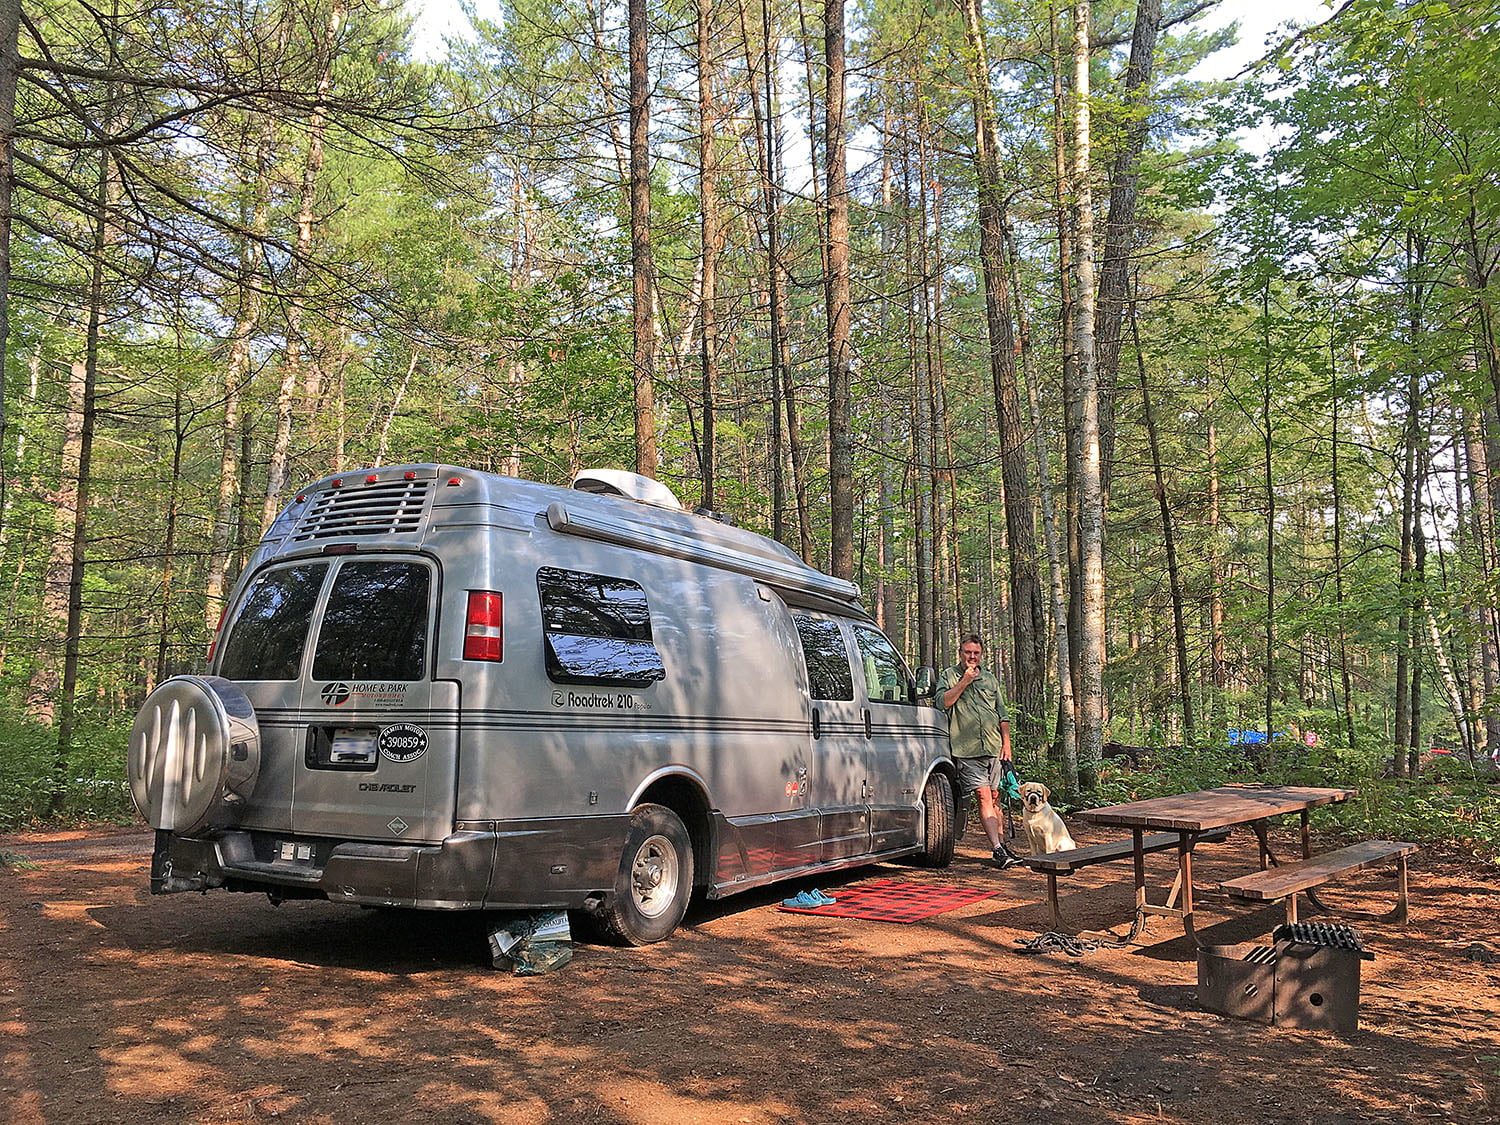 A Man and his dog on a leash leaning on a camper van parked at a forested RV site in Bon Echo Provincial Park, in the Ottawa valley.